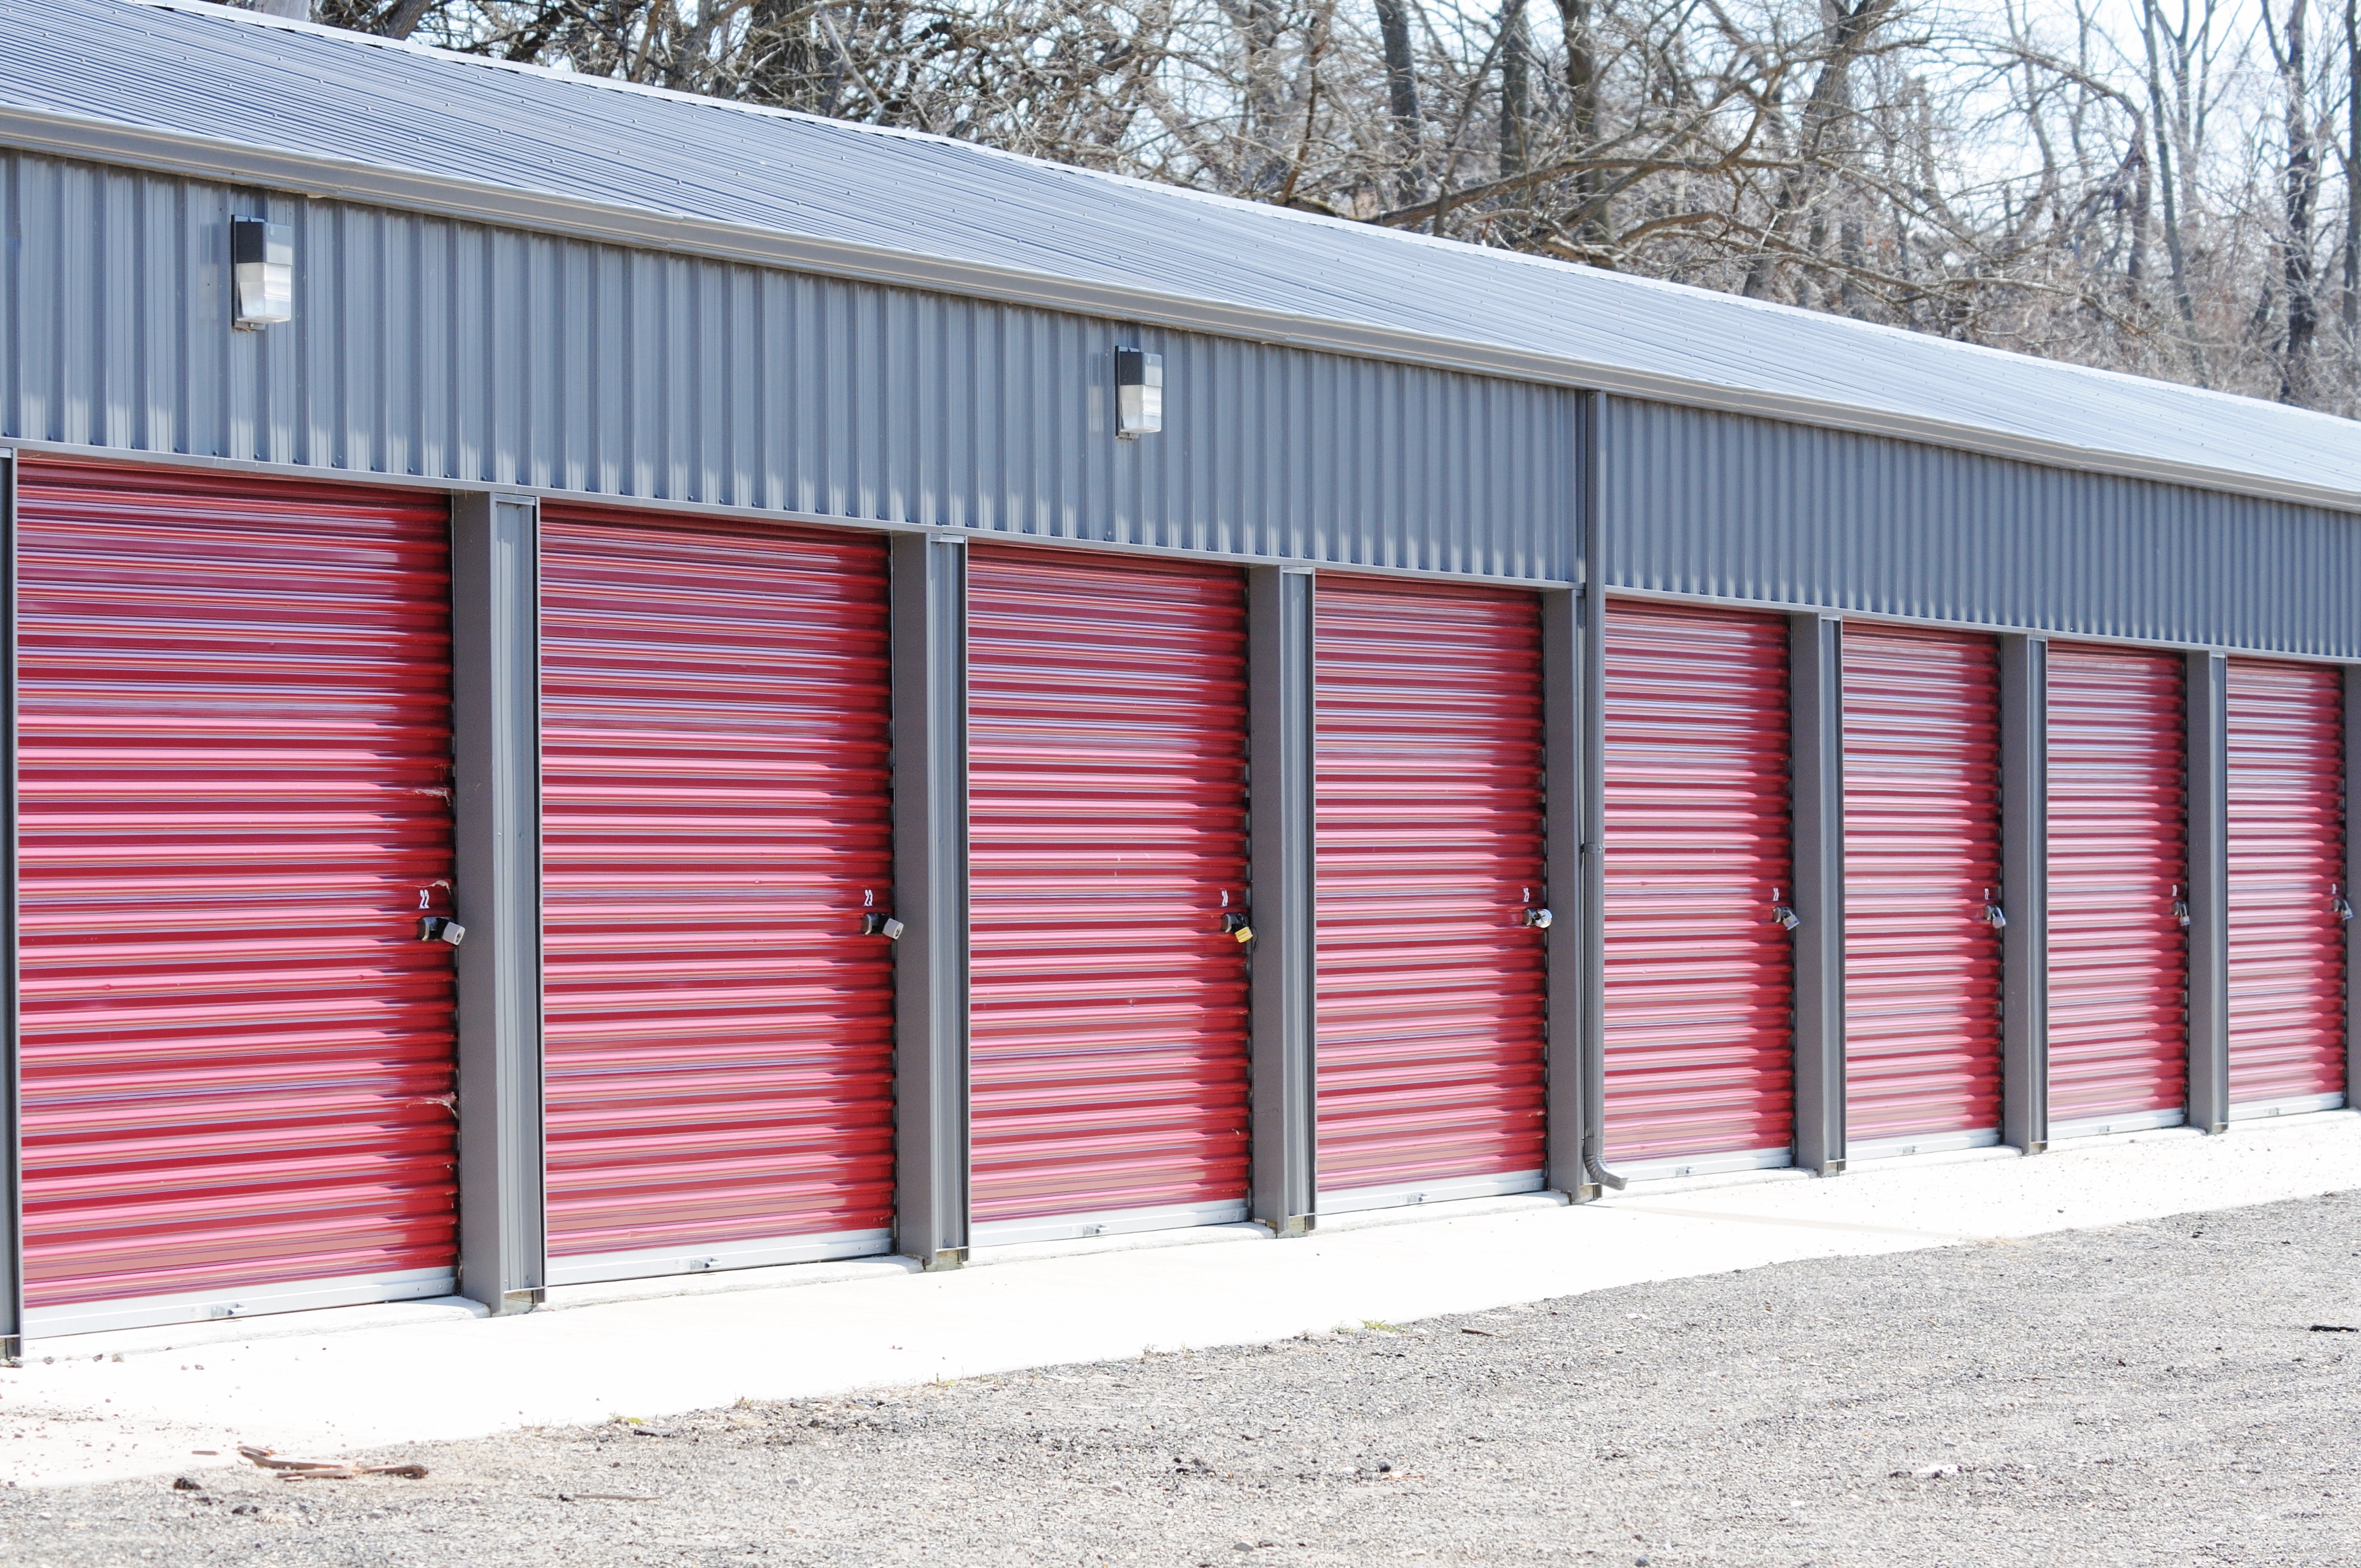 Reasons to Consider a Self-Storage Company in Caldwell, ID